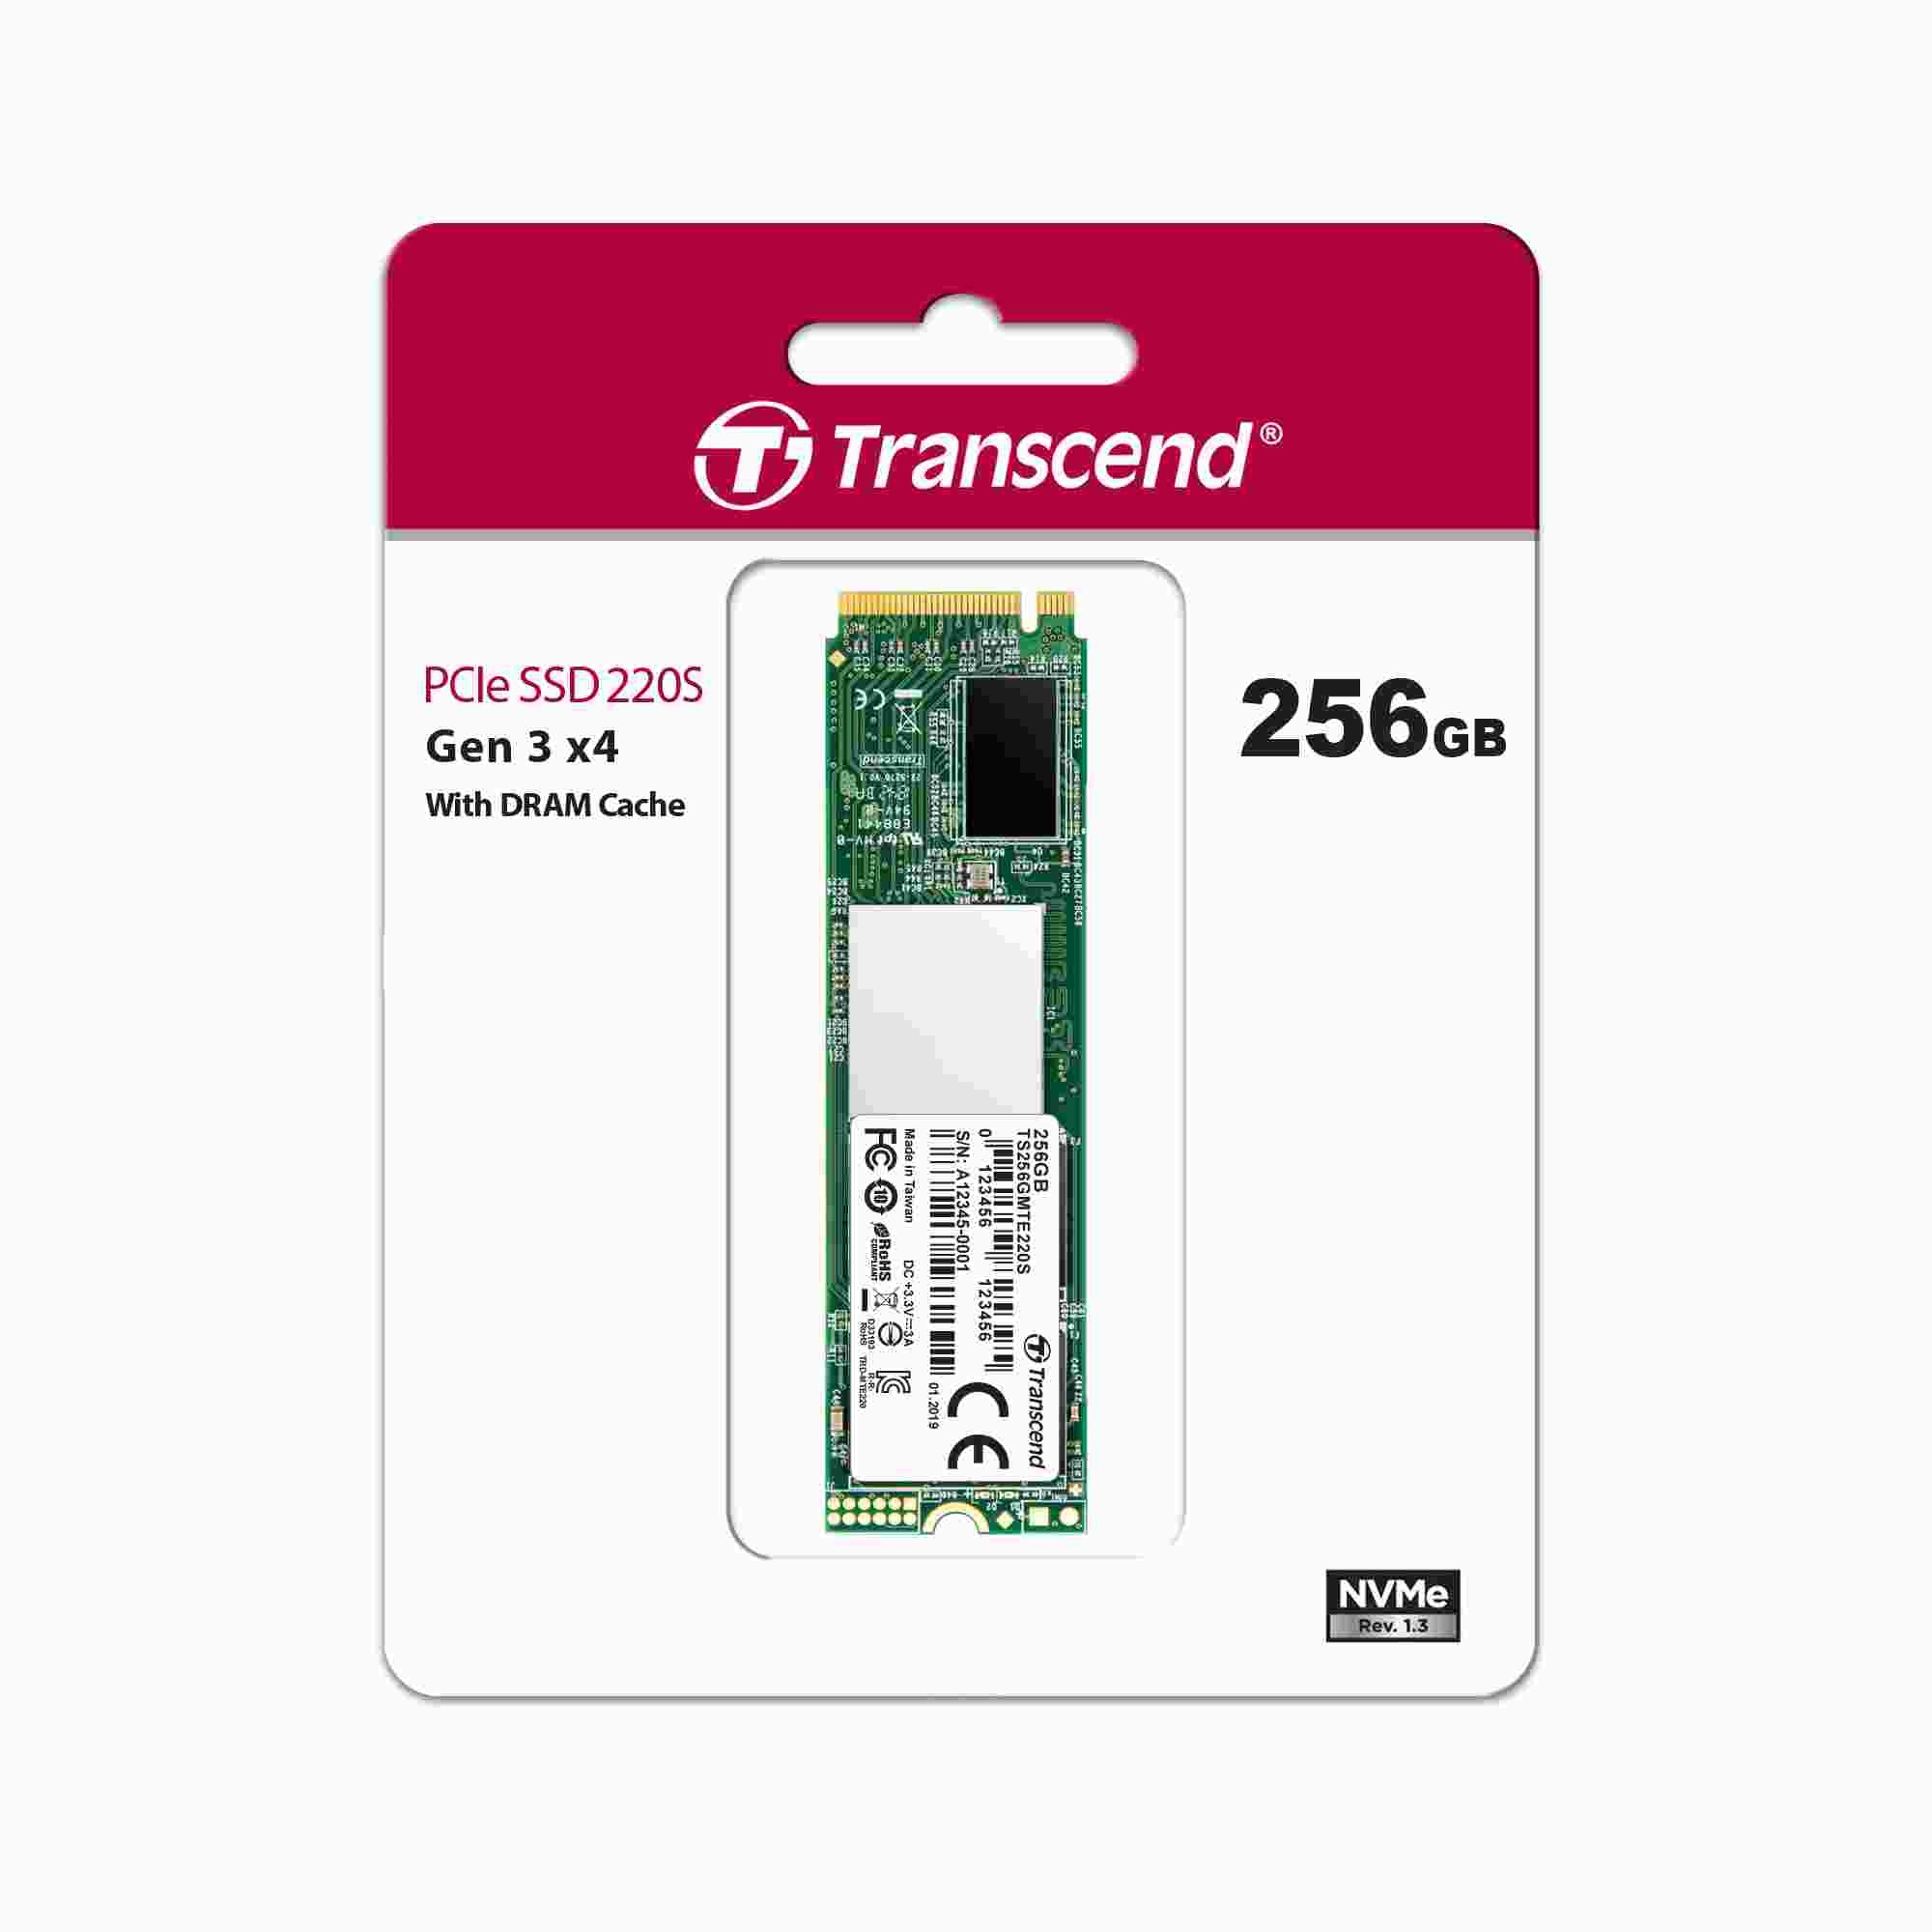 Transcend SSD Scope 4.18 download the new version